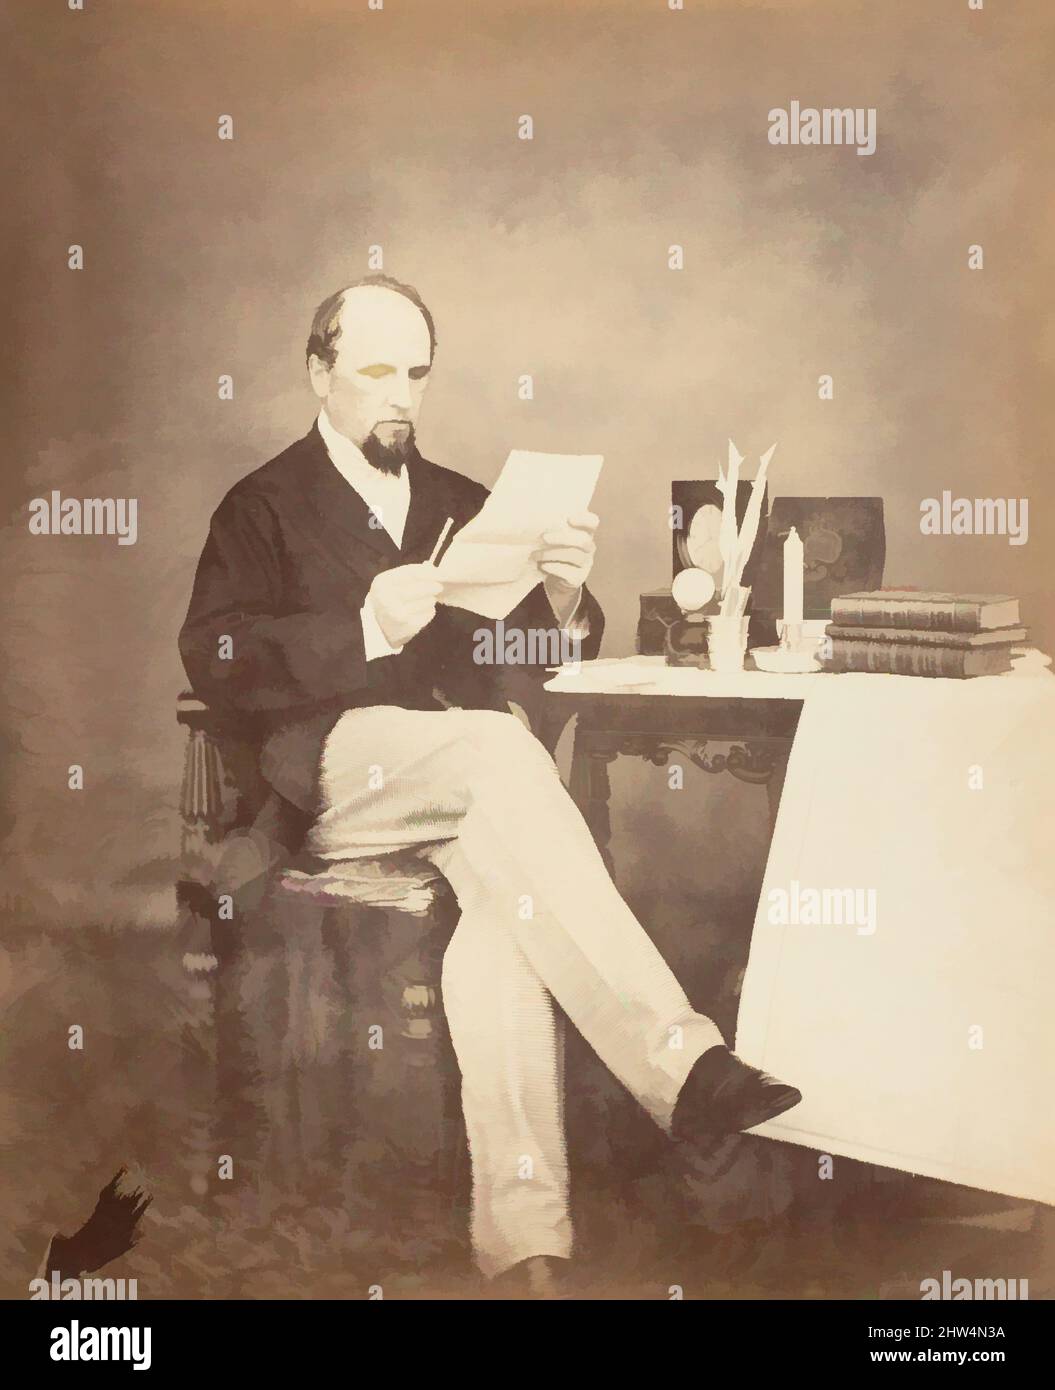 Art inspired by The Earl Canning, K.G., K.S.I., G.C.B., Calcutta, 1858–61, Albumen silver print from glass negative, Image: 26.5 x 21.7 cm (10 7/16 x 8 9/16 in.), Photographs, Bourne and Shephard, Samuel Bourne (British, 1834–1912), Charles Shepherd (British, Classic works modernized by Artotop with a splash of modernity. Shapes, color and value, eye-catching visual impact on art. Emotions through freedom of artworks in a contemporary way. A timeless message pursuing a wildly creative new direction. Artists turning to the digital medium and creating the Artotop NFT Stock Photo